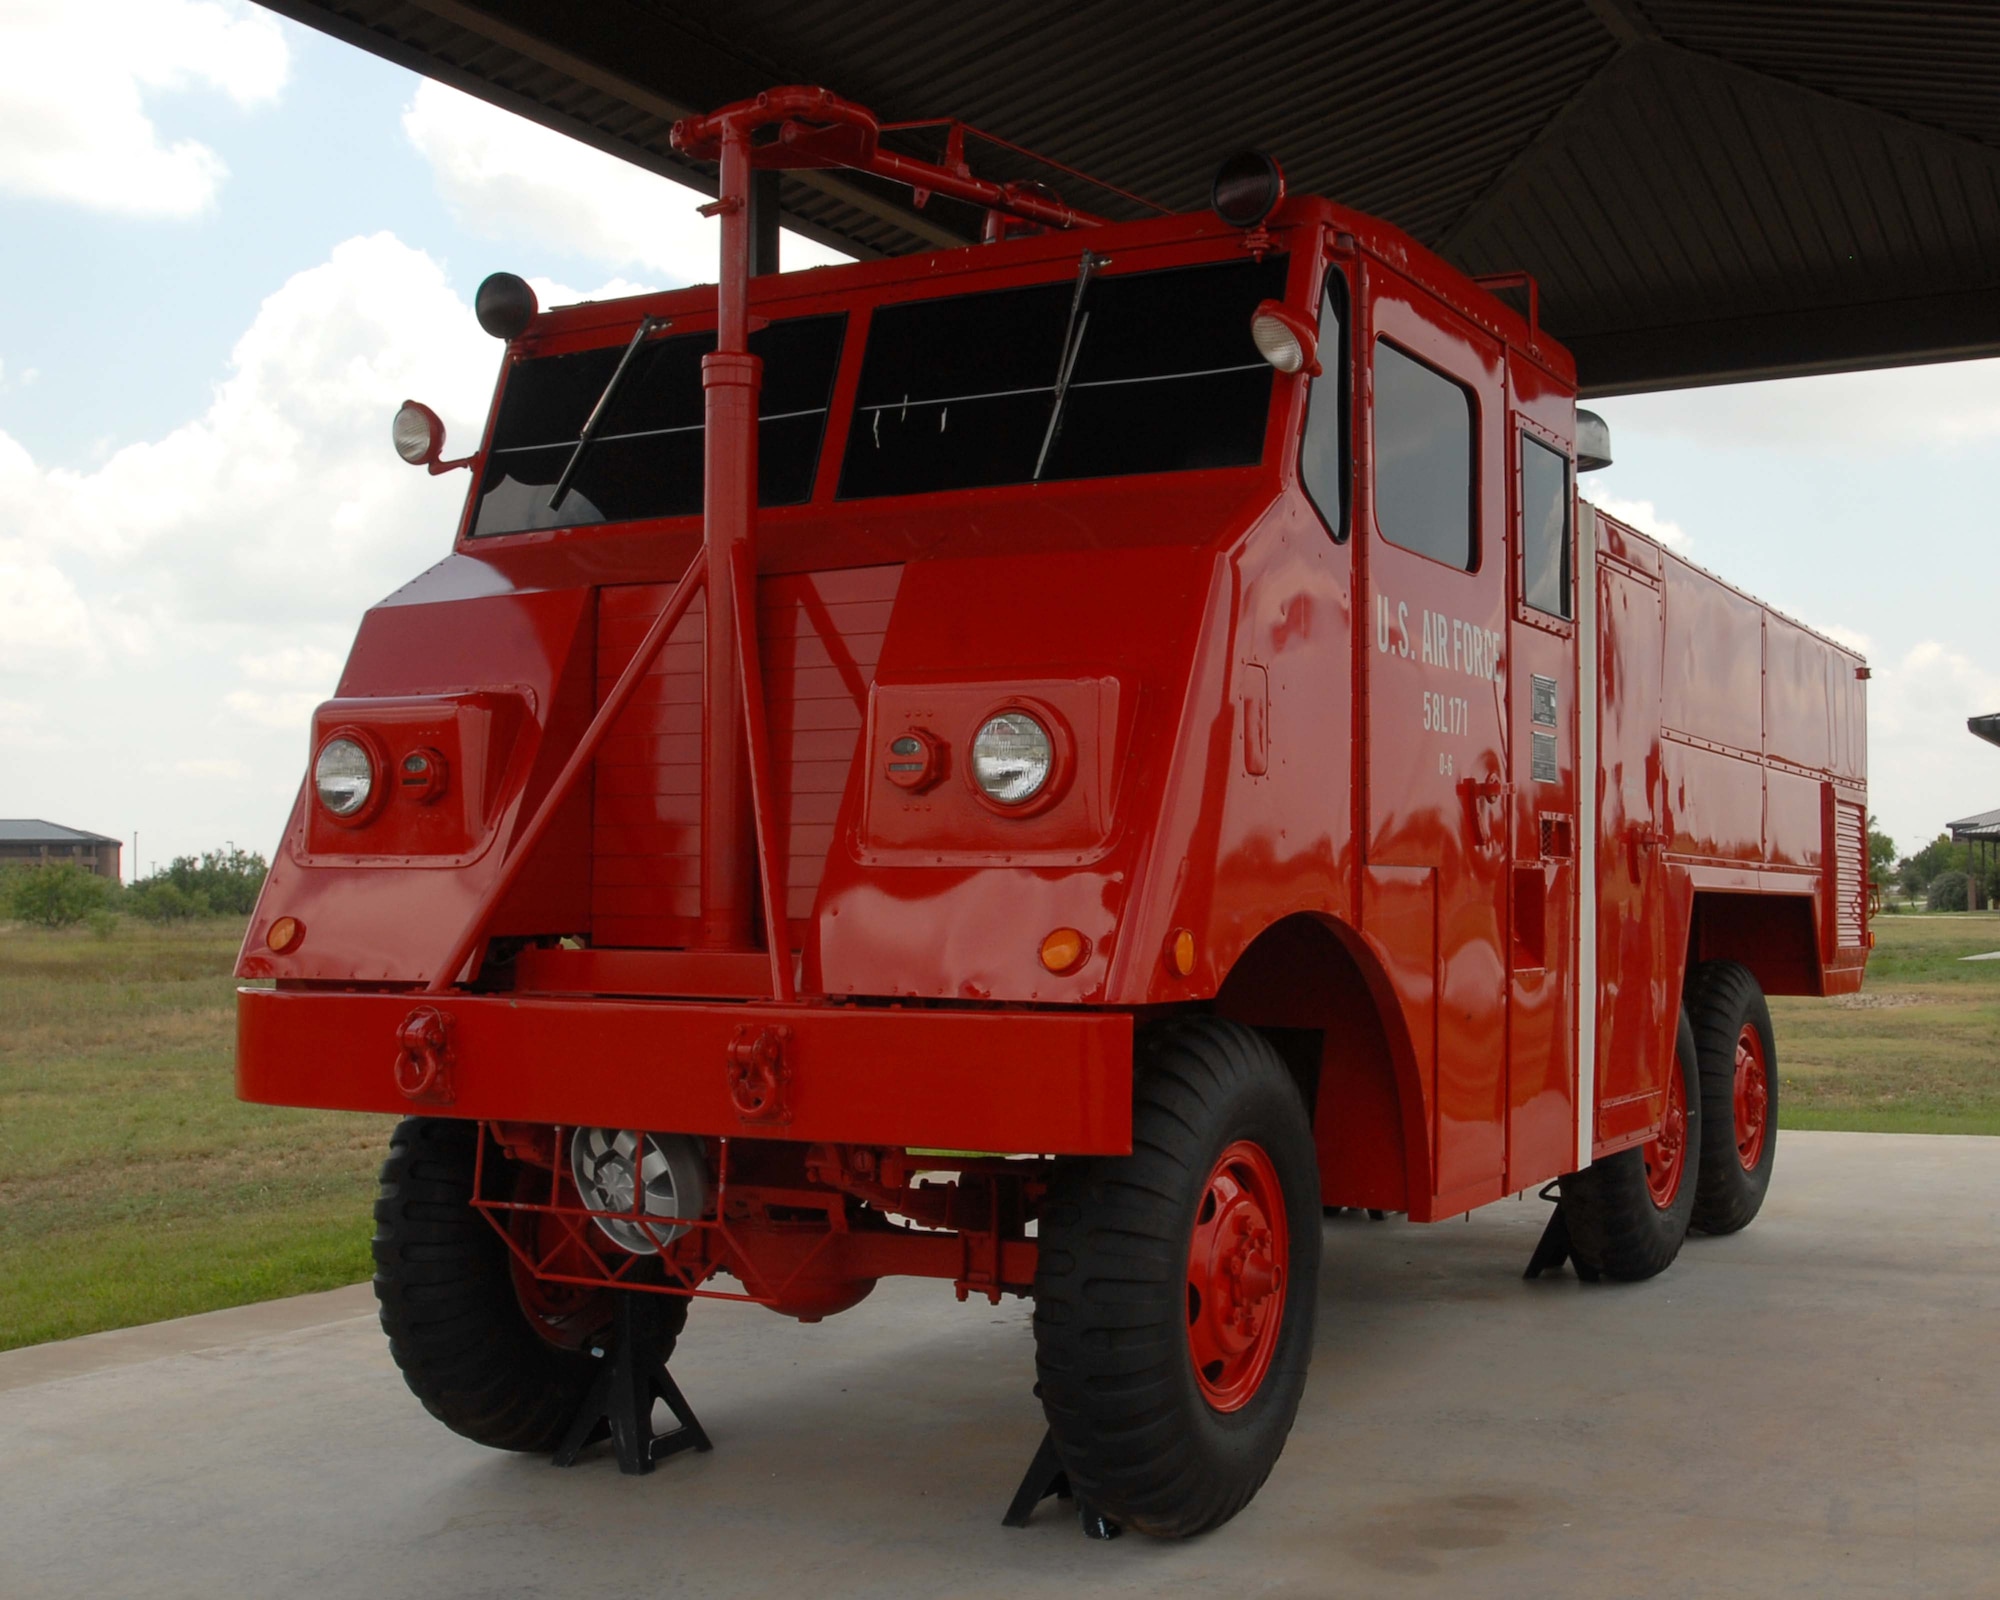 A 1958 O-6 Cardox Crash Truck on display at Goodfellow Air Force Base, Texas. Discovered by Chief Mark Giuliano and his firefighters on a rural highway, they bought, restored and had the truck shipped to Goodfellow, in 2004. (Courtesy photo www.militaryfirefighterheritage.com)